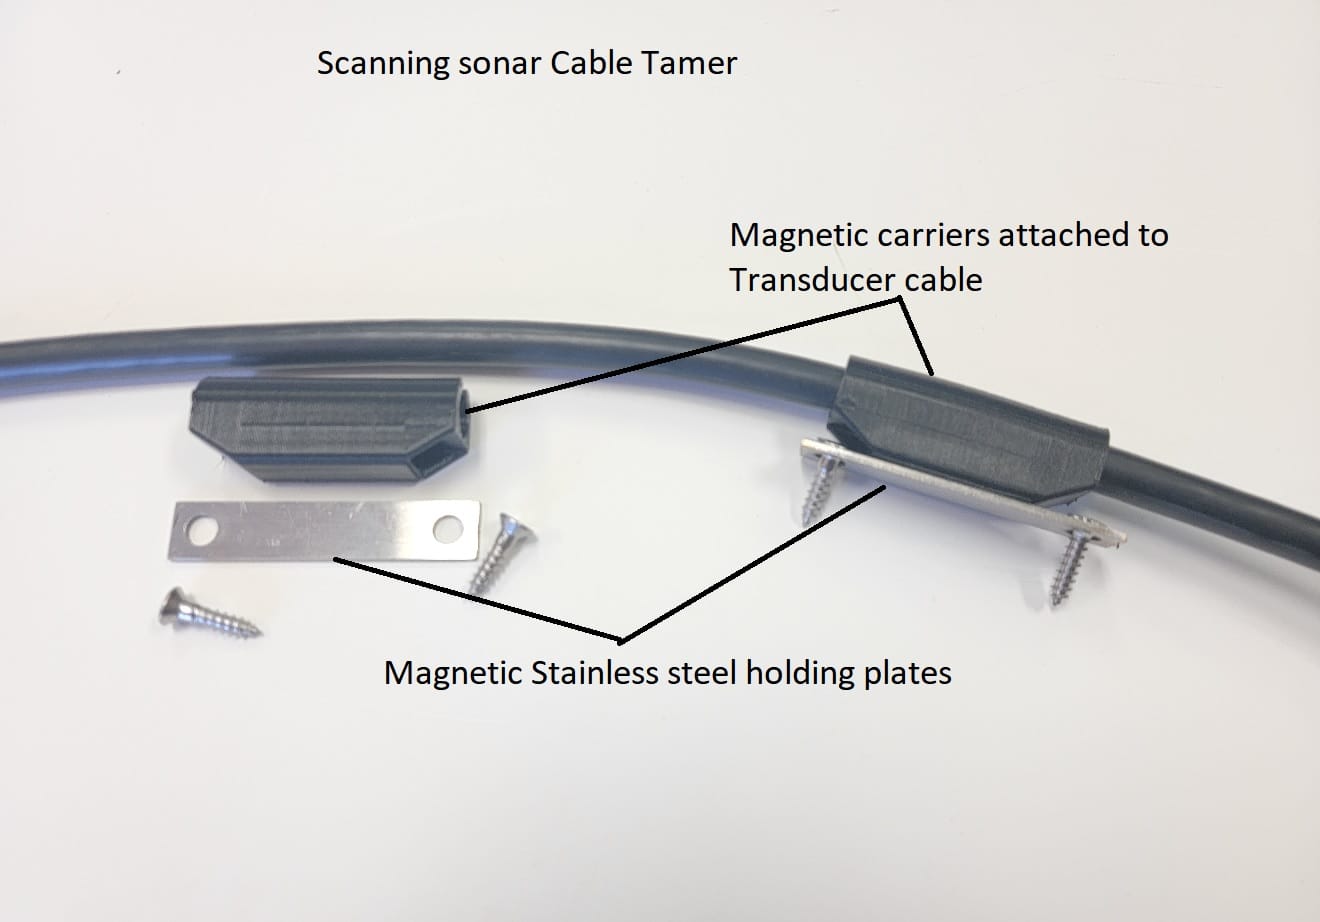 Transducer Cable Tamer (Active sonars - Livescope, Active Target